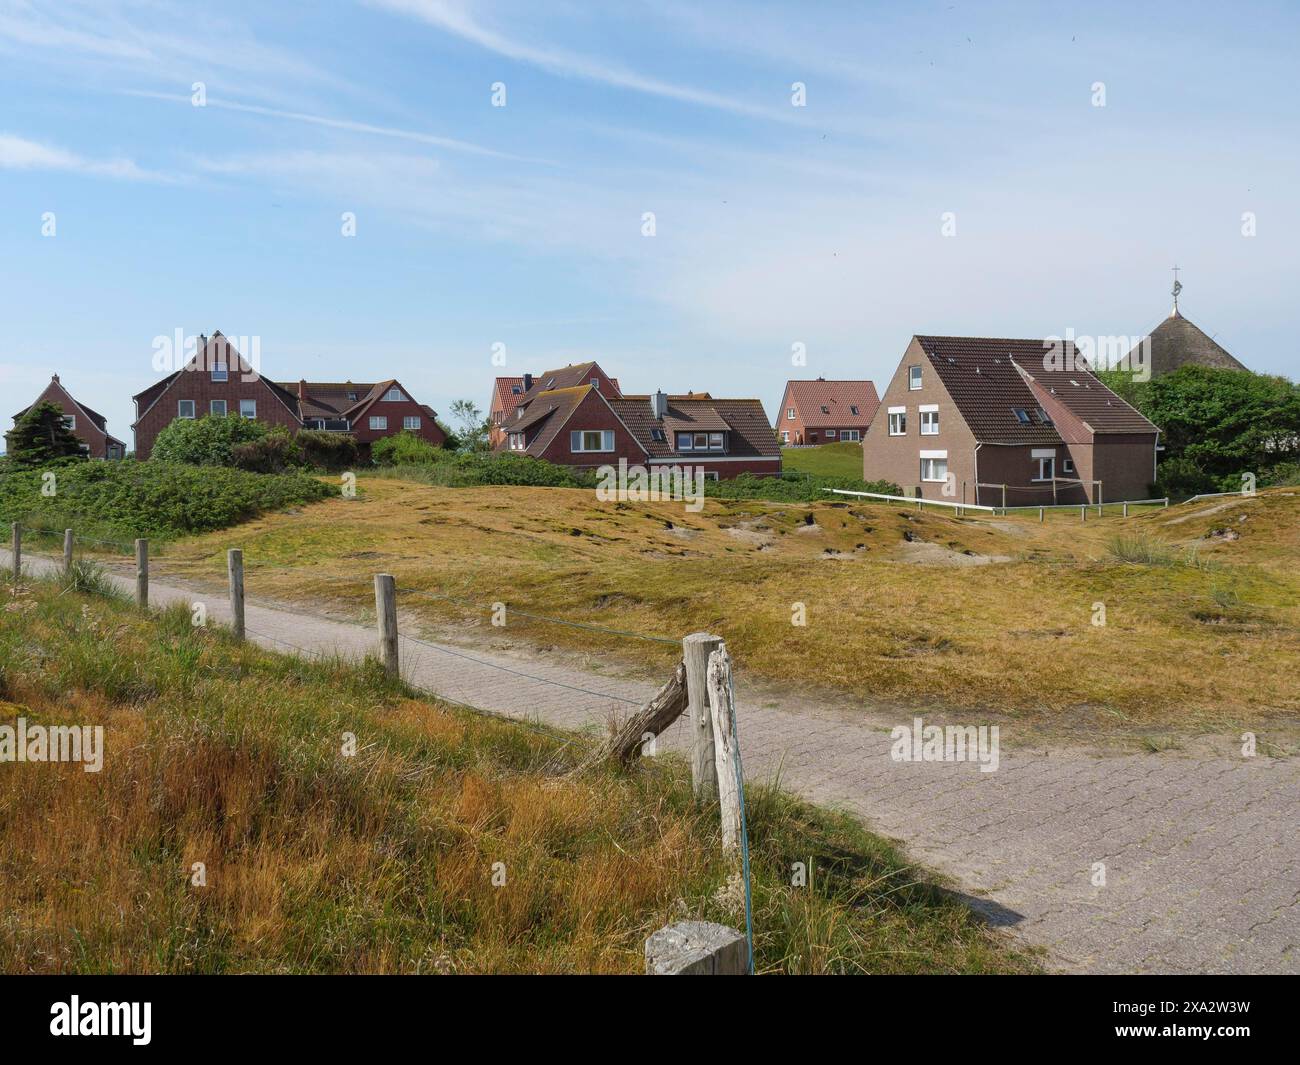 Rural scene with several brick houses in the background and a path through a meadow, Baltrum Germany Stock Photo